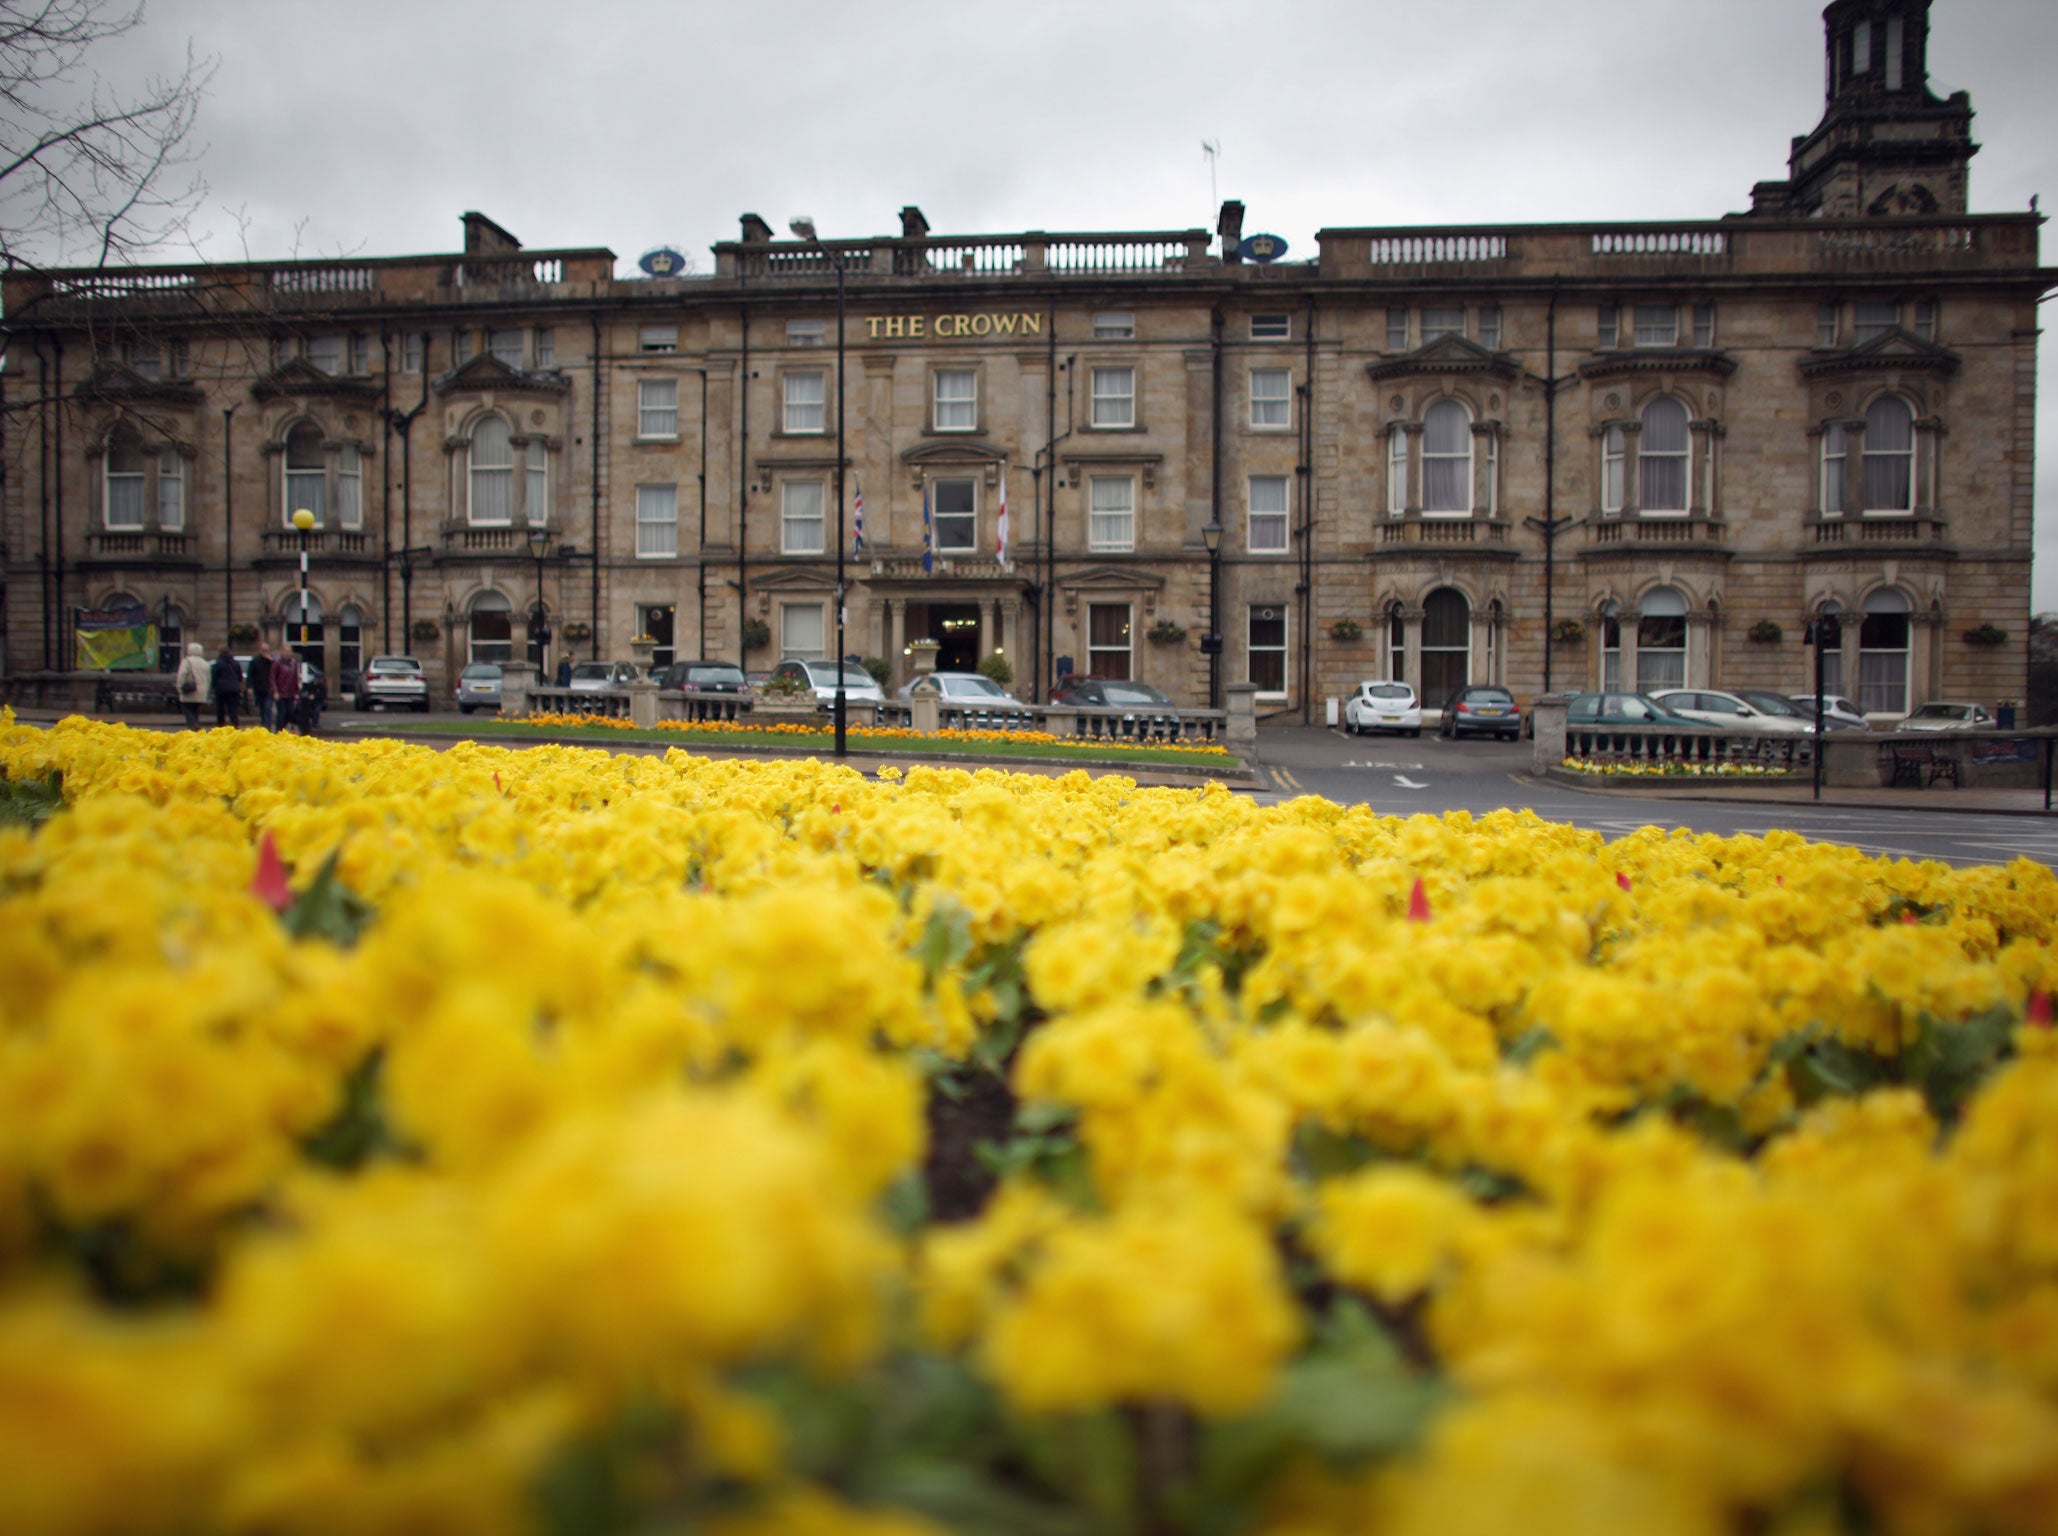 Harrogate is the happiest place in the UK